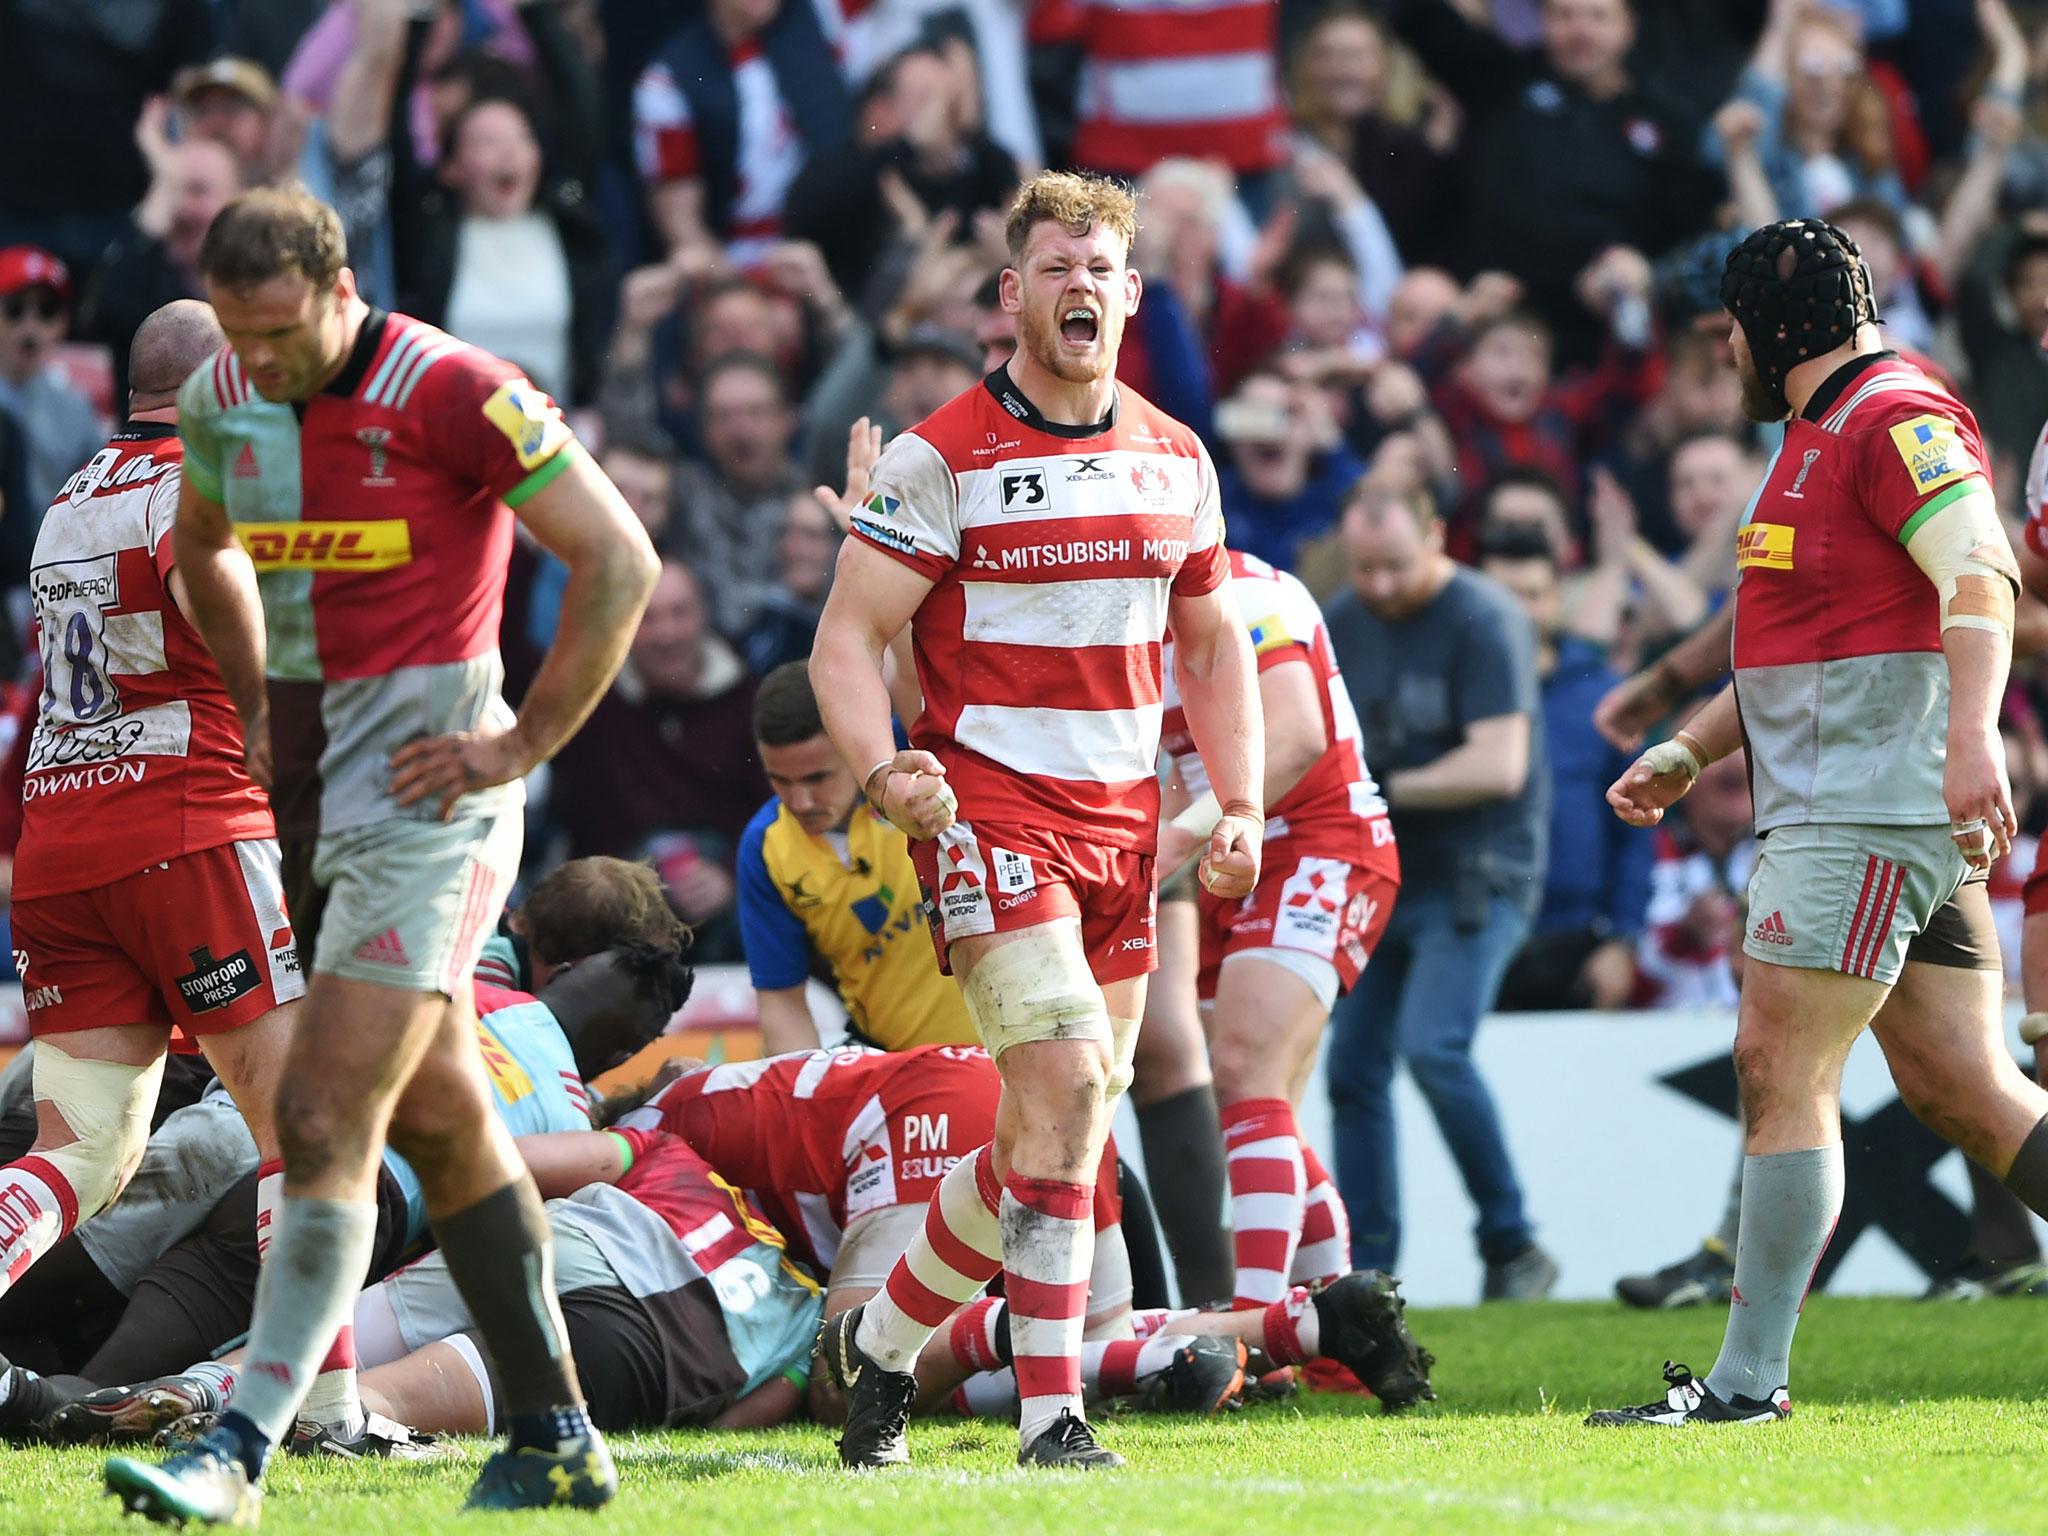 Gloucester are now three points off the fourth spot with two matches remaining